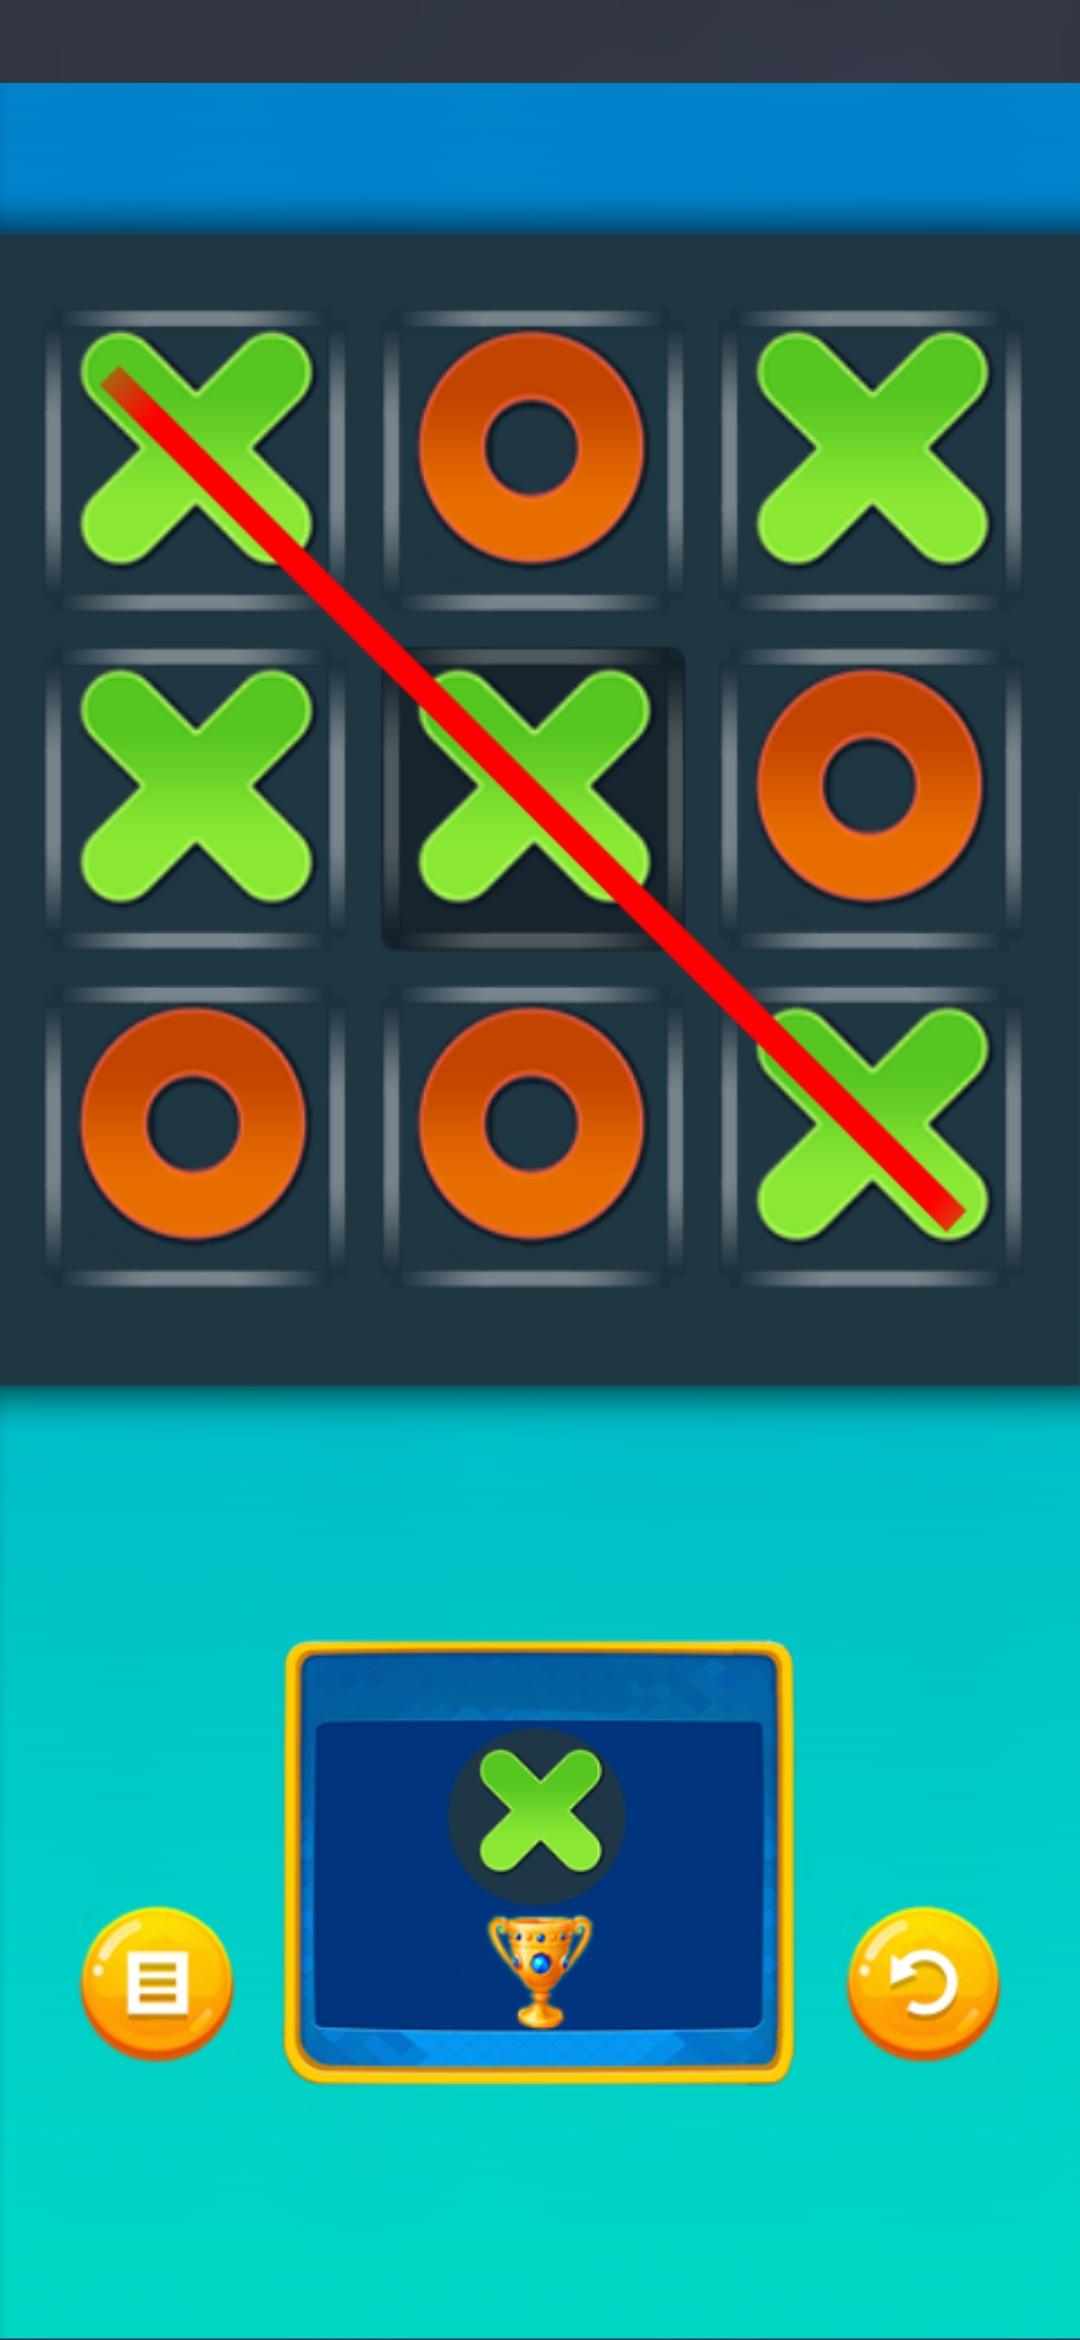 Tic tac toe multiplayer game APK for Android - Download